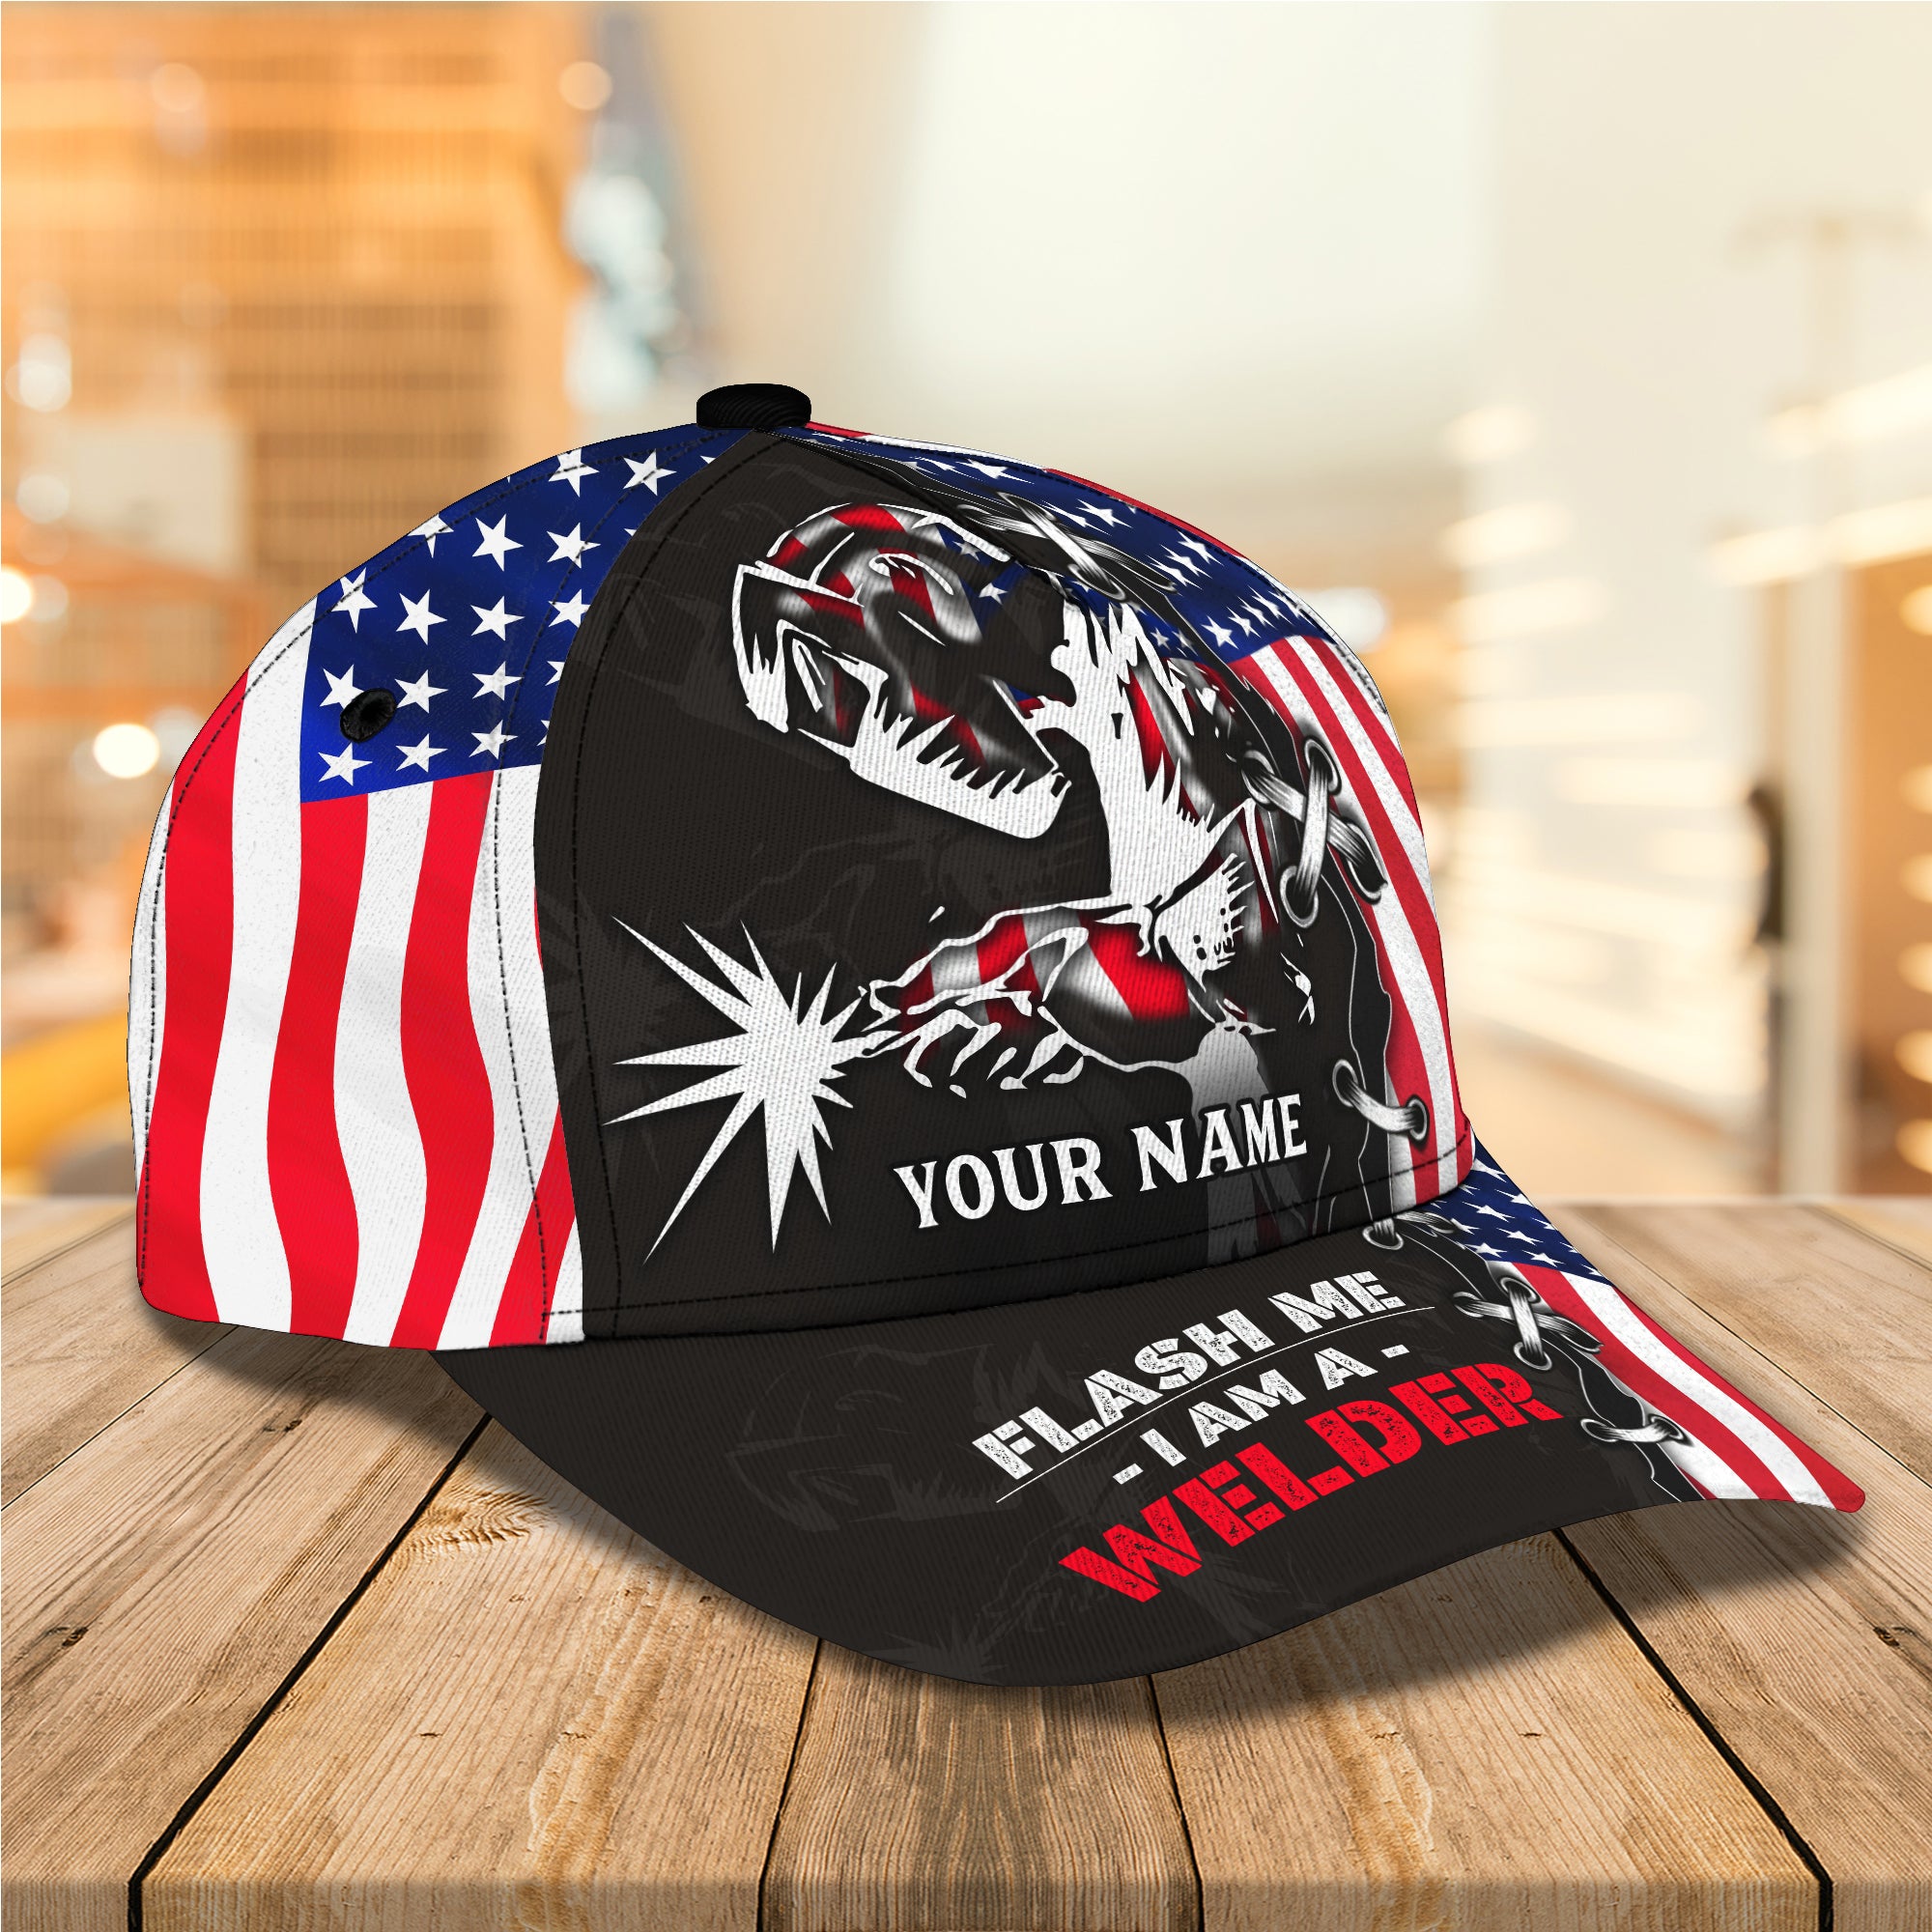 Welder 2 - Personalized Name Cap - tra96